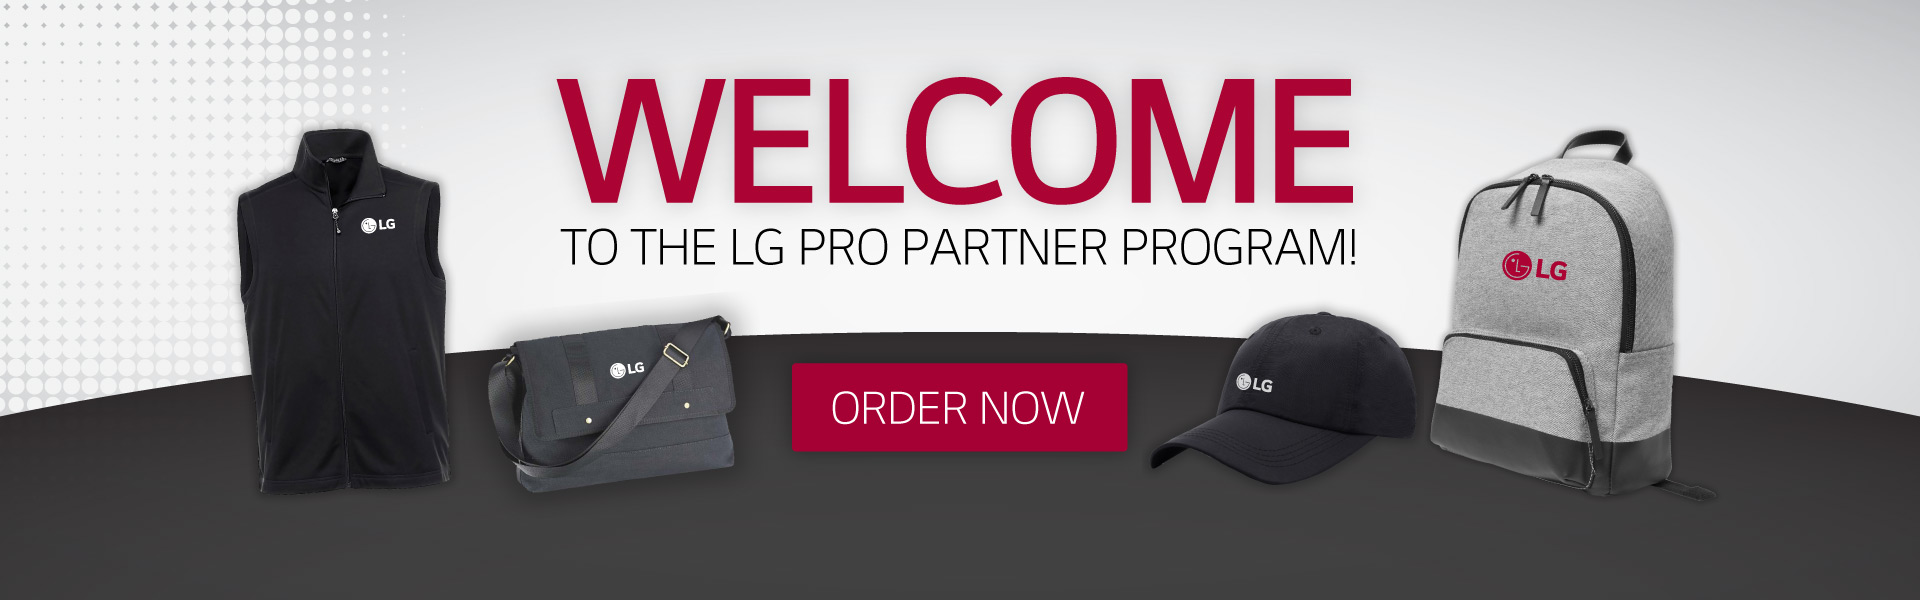 Welcome to your LG Promotional Item Ordering Portal